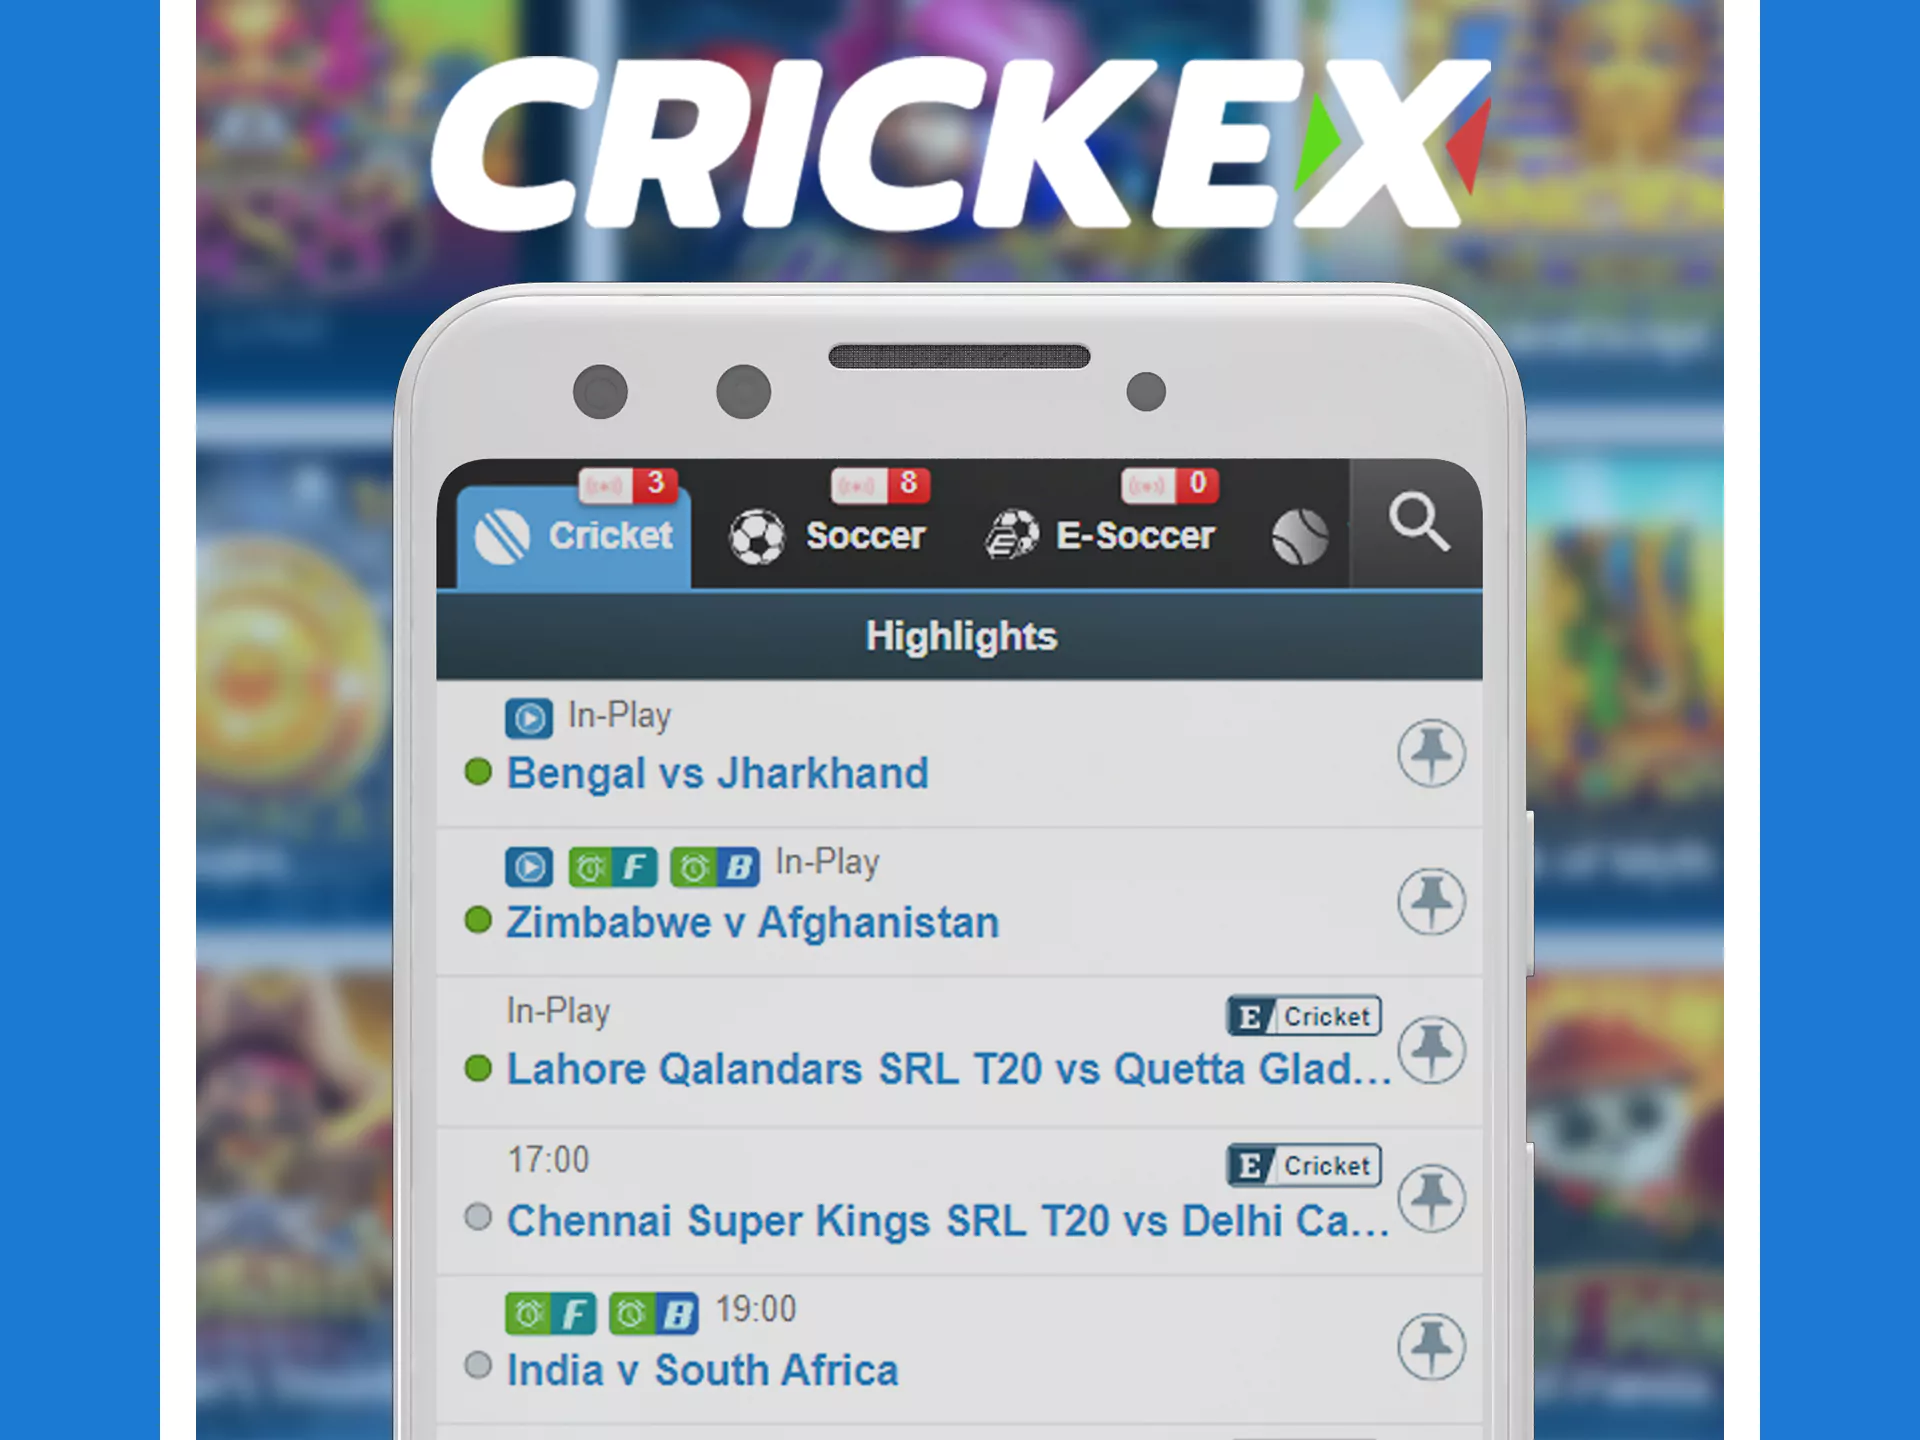 Place a bet in the Crickex app with the current instructions.